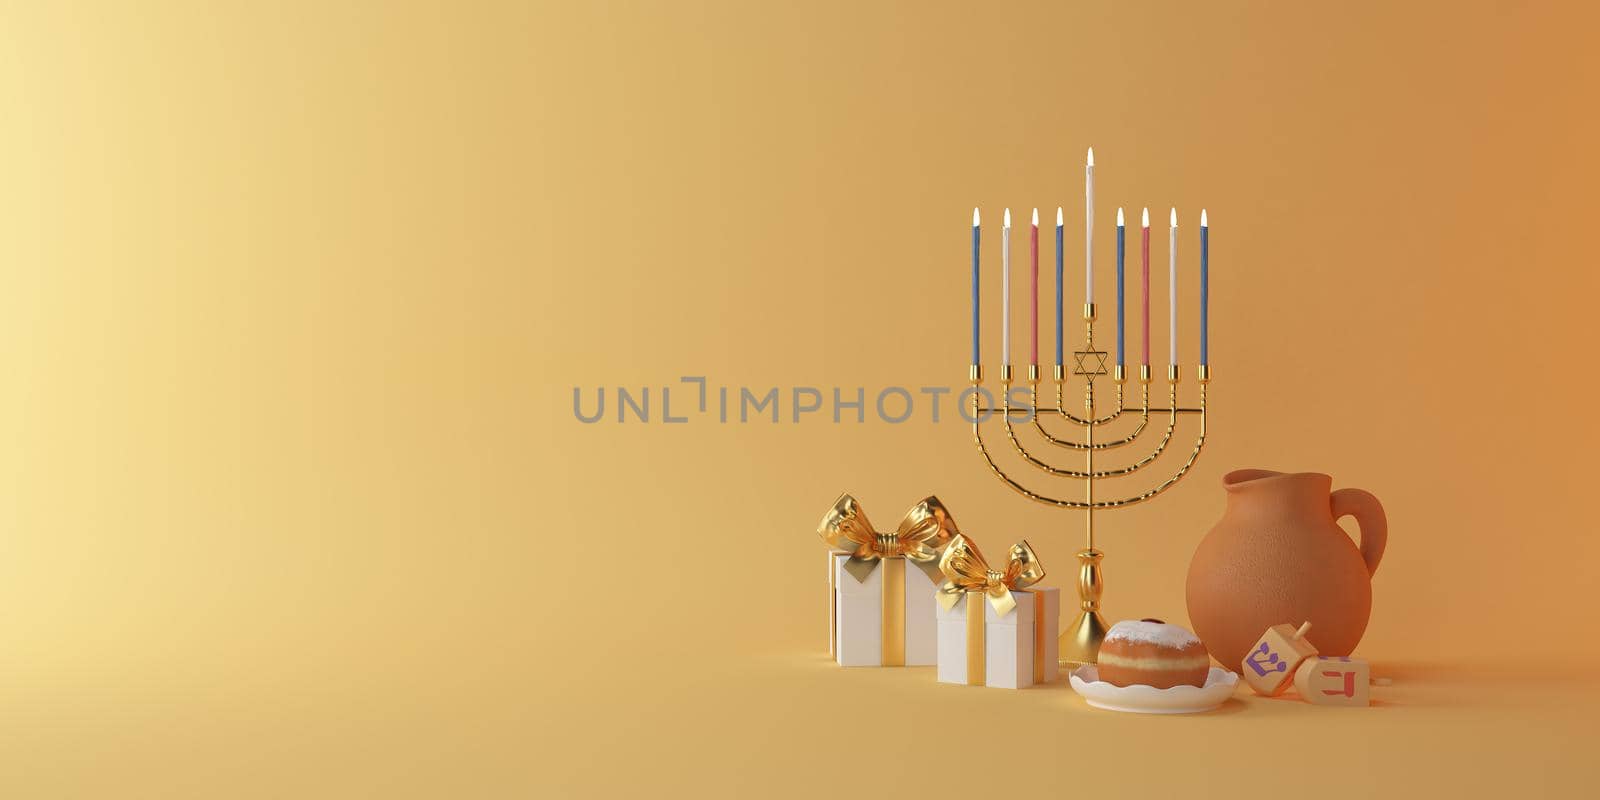 3d rendering Image of Jewish holiday Hanukkah with menorah or traditional Candelabra,gif box, donuts and wooden dreidels orspinning top, doughnut on a yellow background.